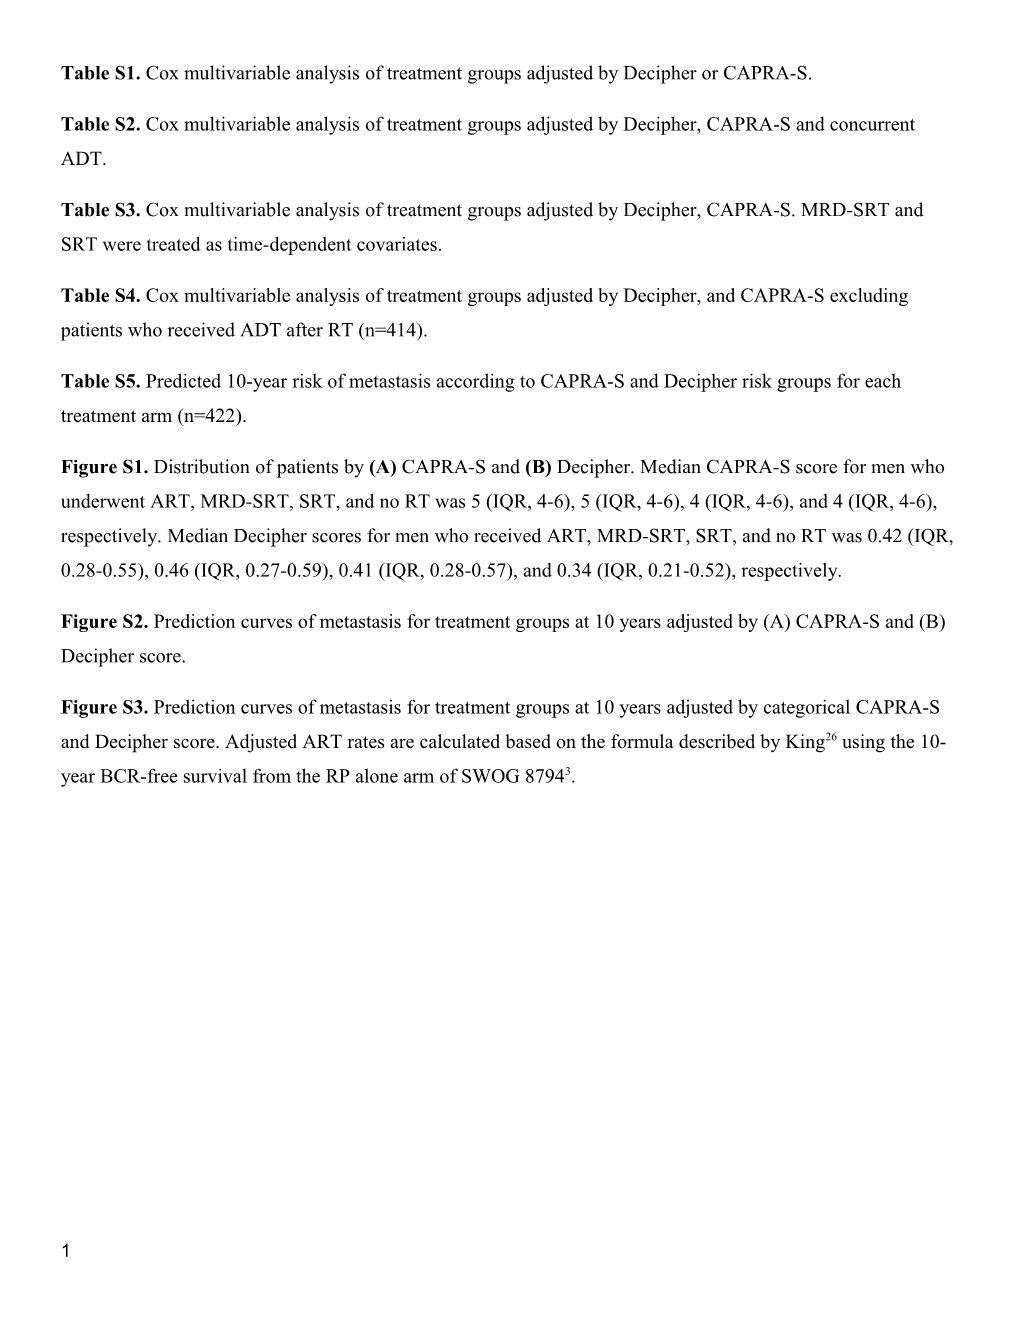 Table S1. Cox Multivariable Analysis of Treatment Groups Adjusted by Decipher Or CAPRA-S